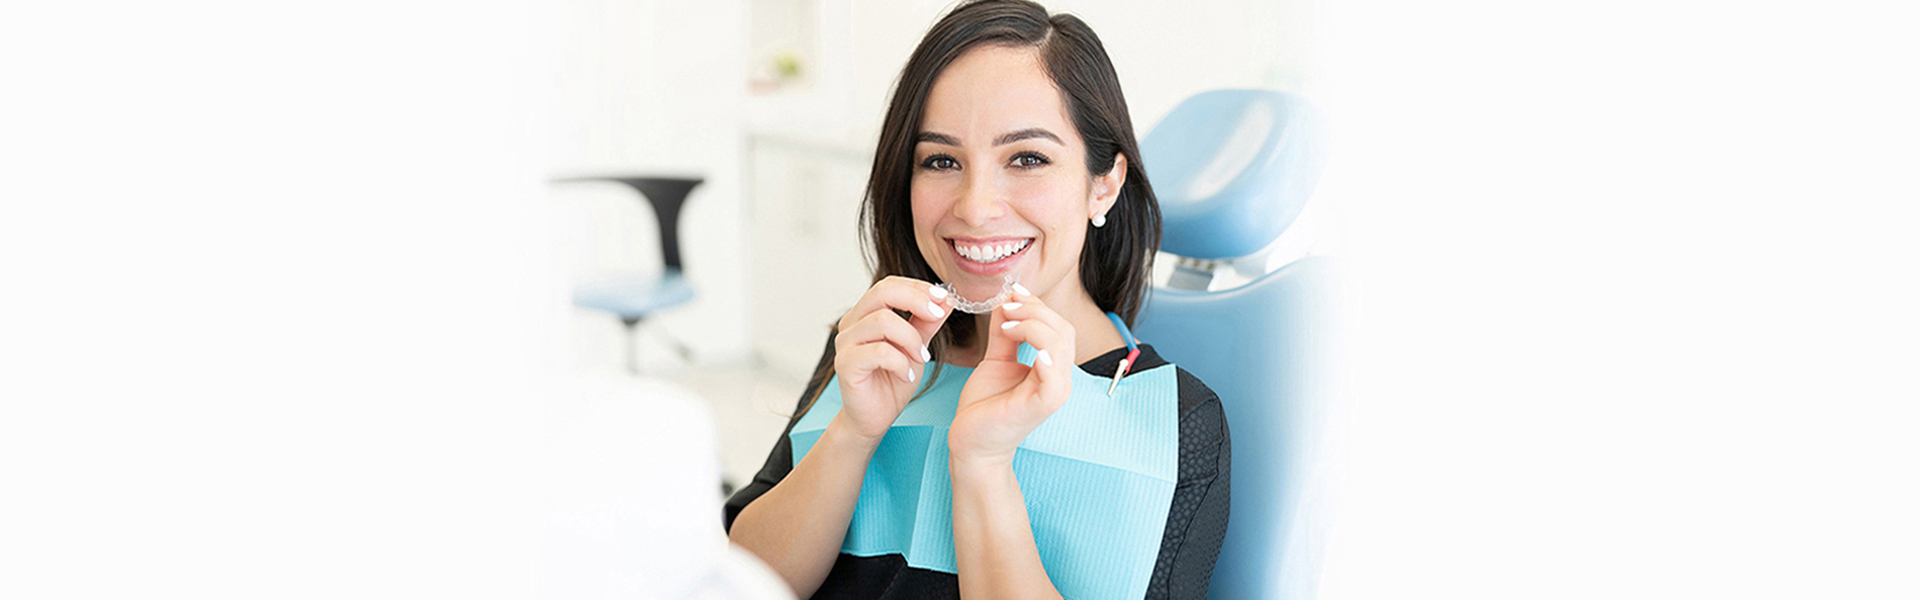 Maintaining Oral Health During Invisalign Treatment: Tips and Tricks